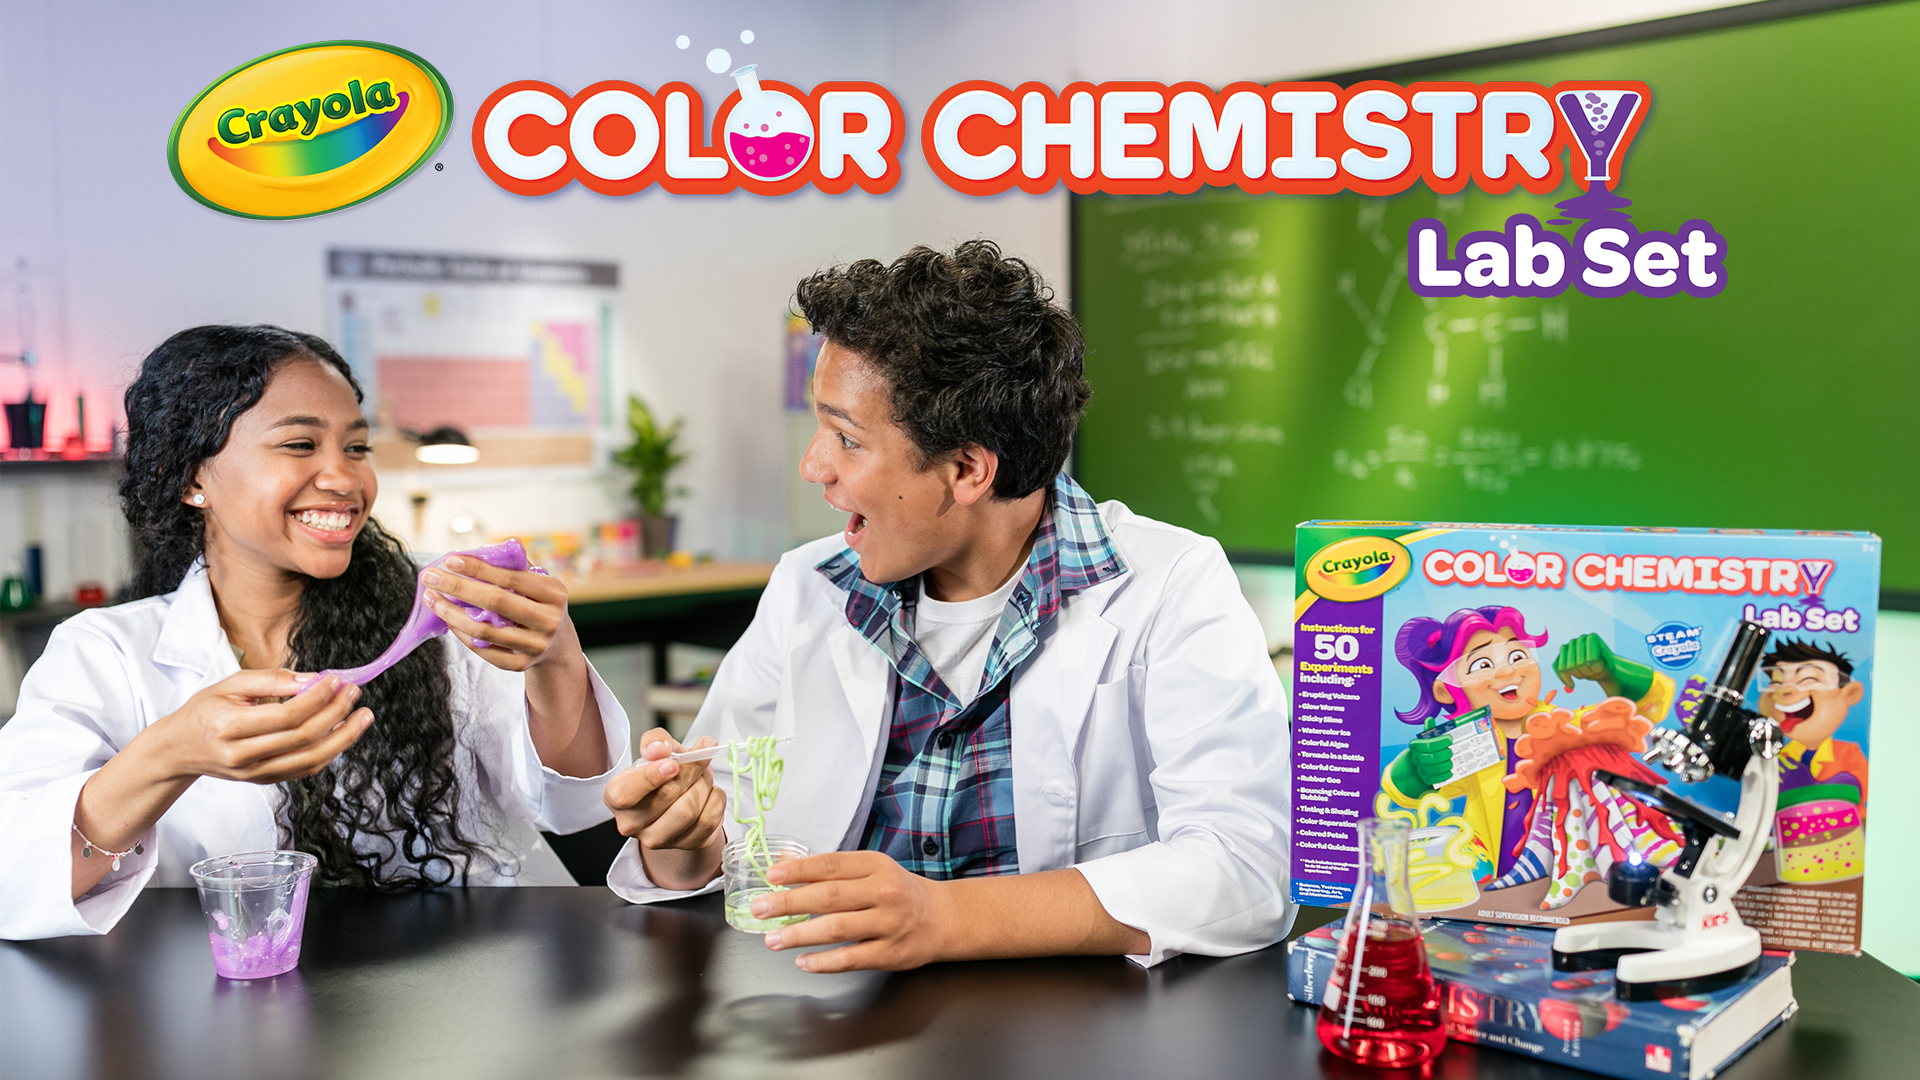 Color Chemistry Lab Package and contents